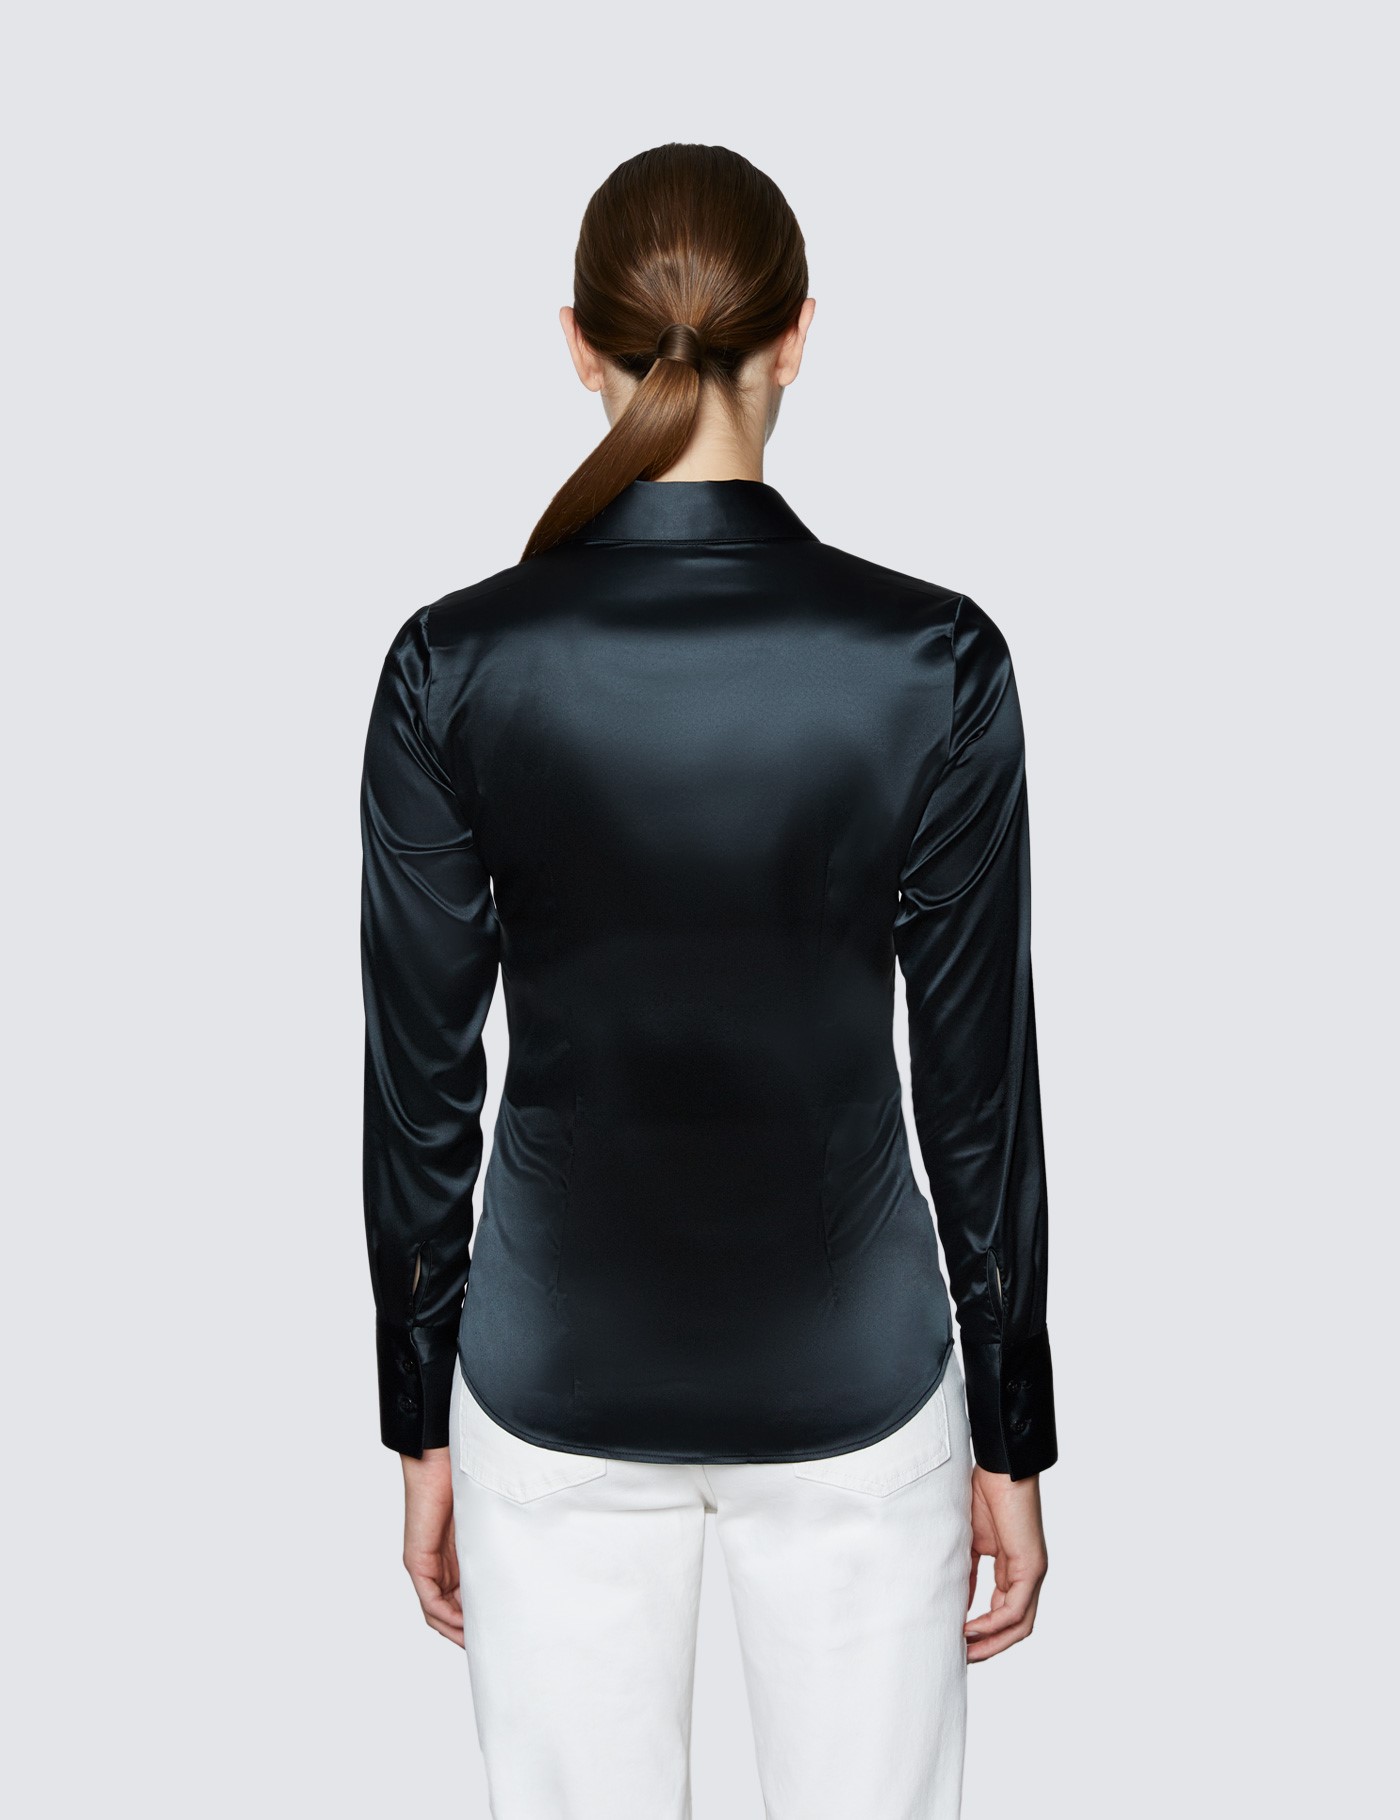 Satin Women S Fitted Shirt With Single Cuff In Black Hawes And Curtis